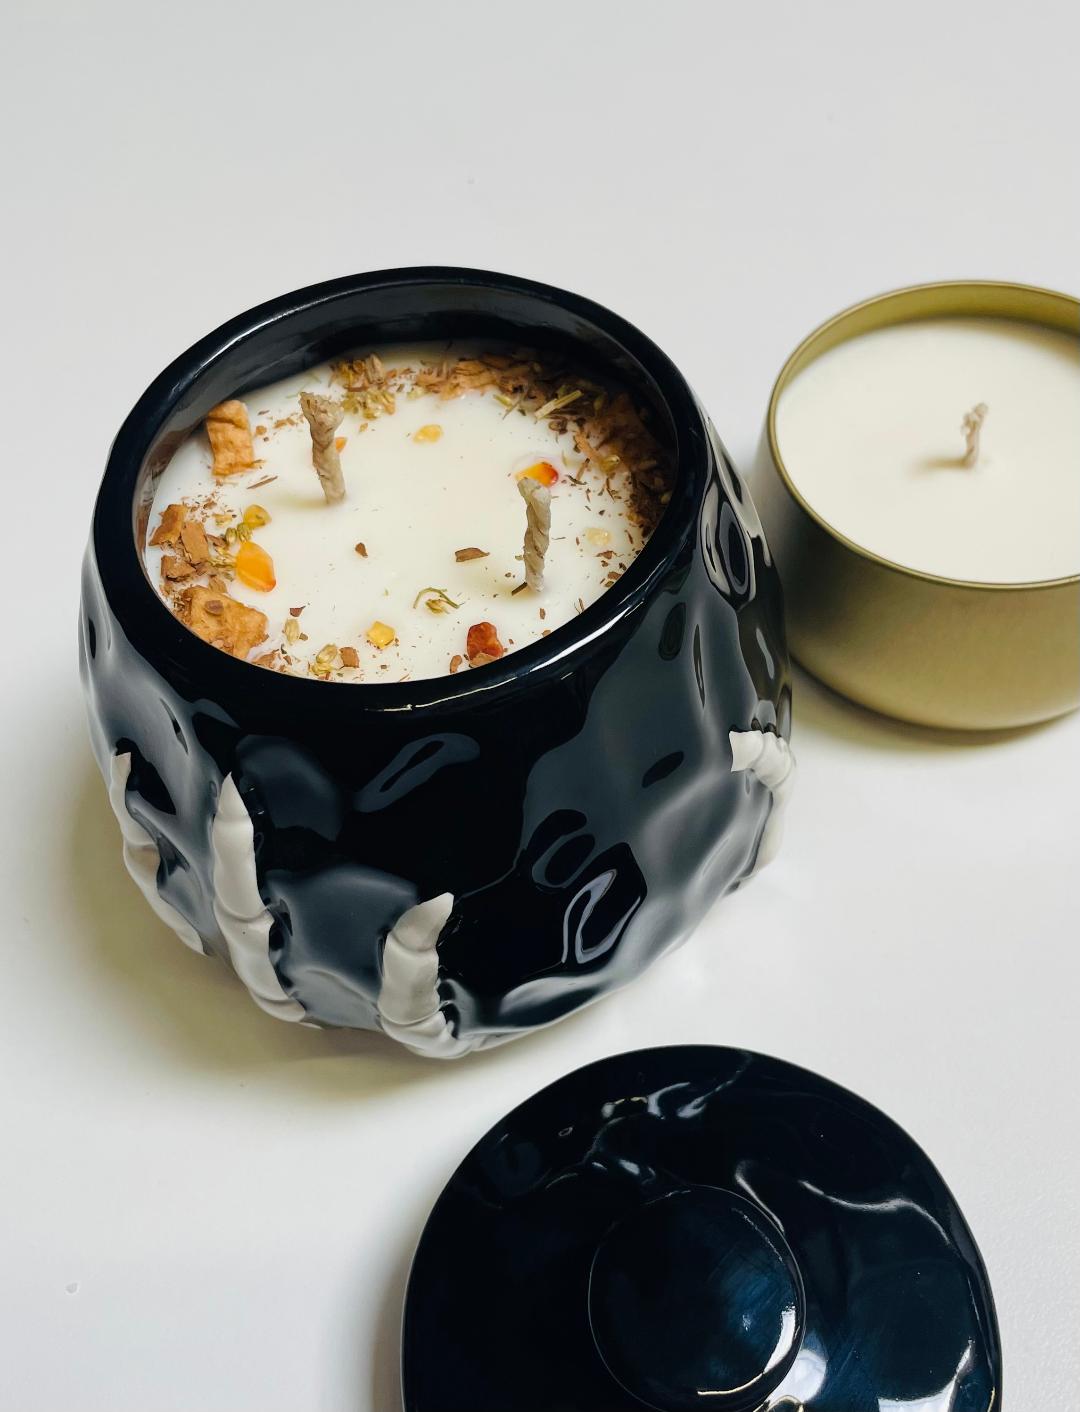 Limited Release! Large Fall Candles - All Soy Wax and Clean Scents 84 Hour Burn Time